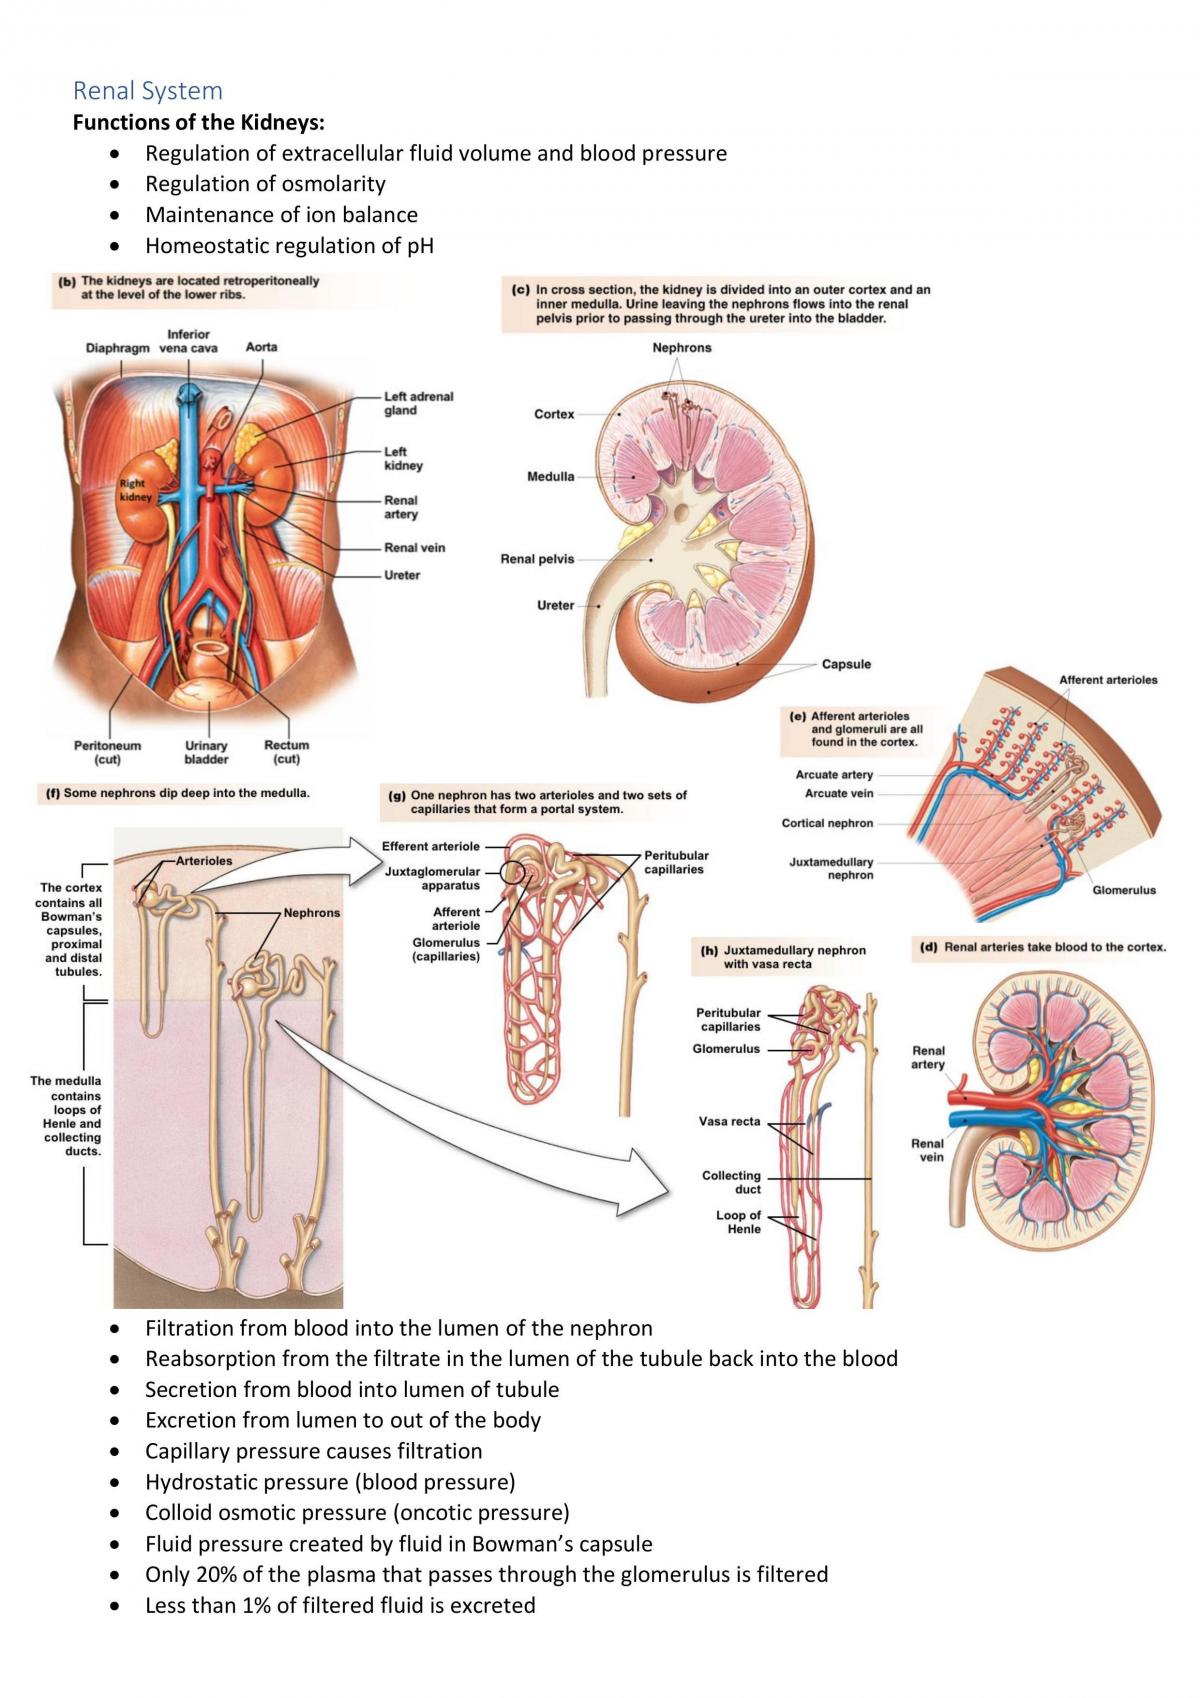 PHYL1007 Digestive and Renal System Module Notes - Page 14